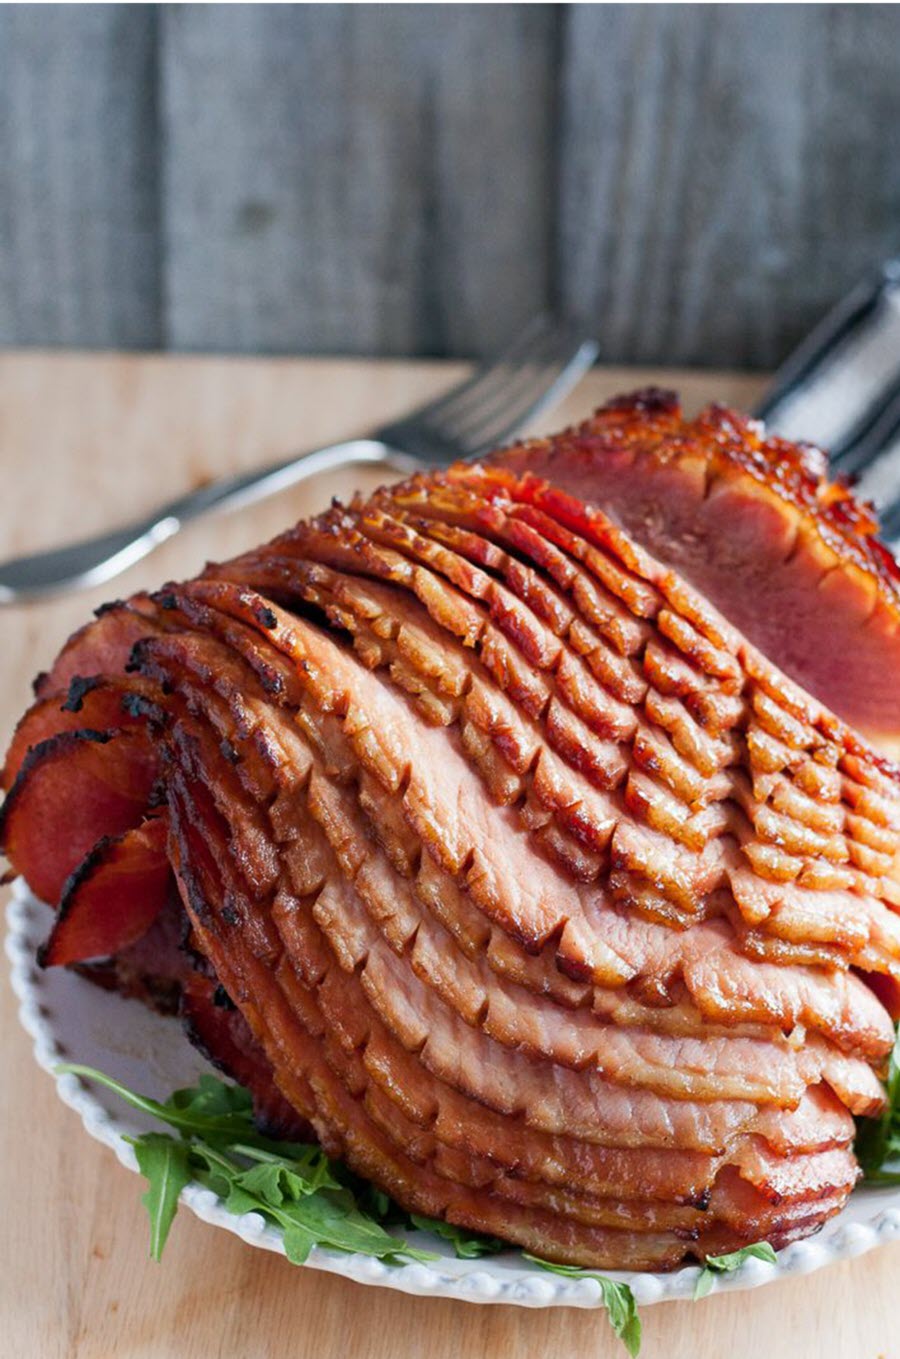 Holiday Wine Pairings for Every Meal - What Wine Goes with Ham